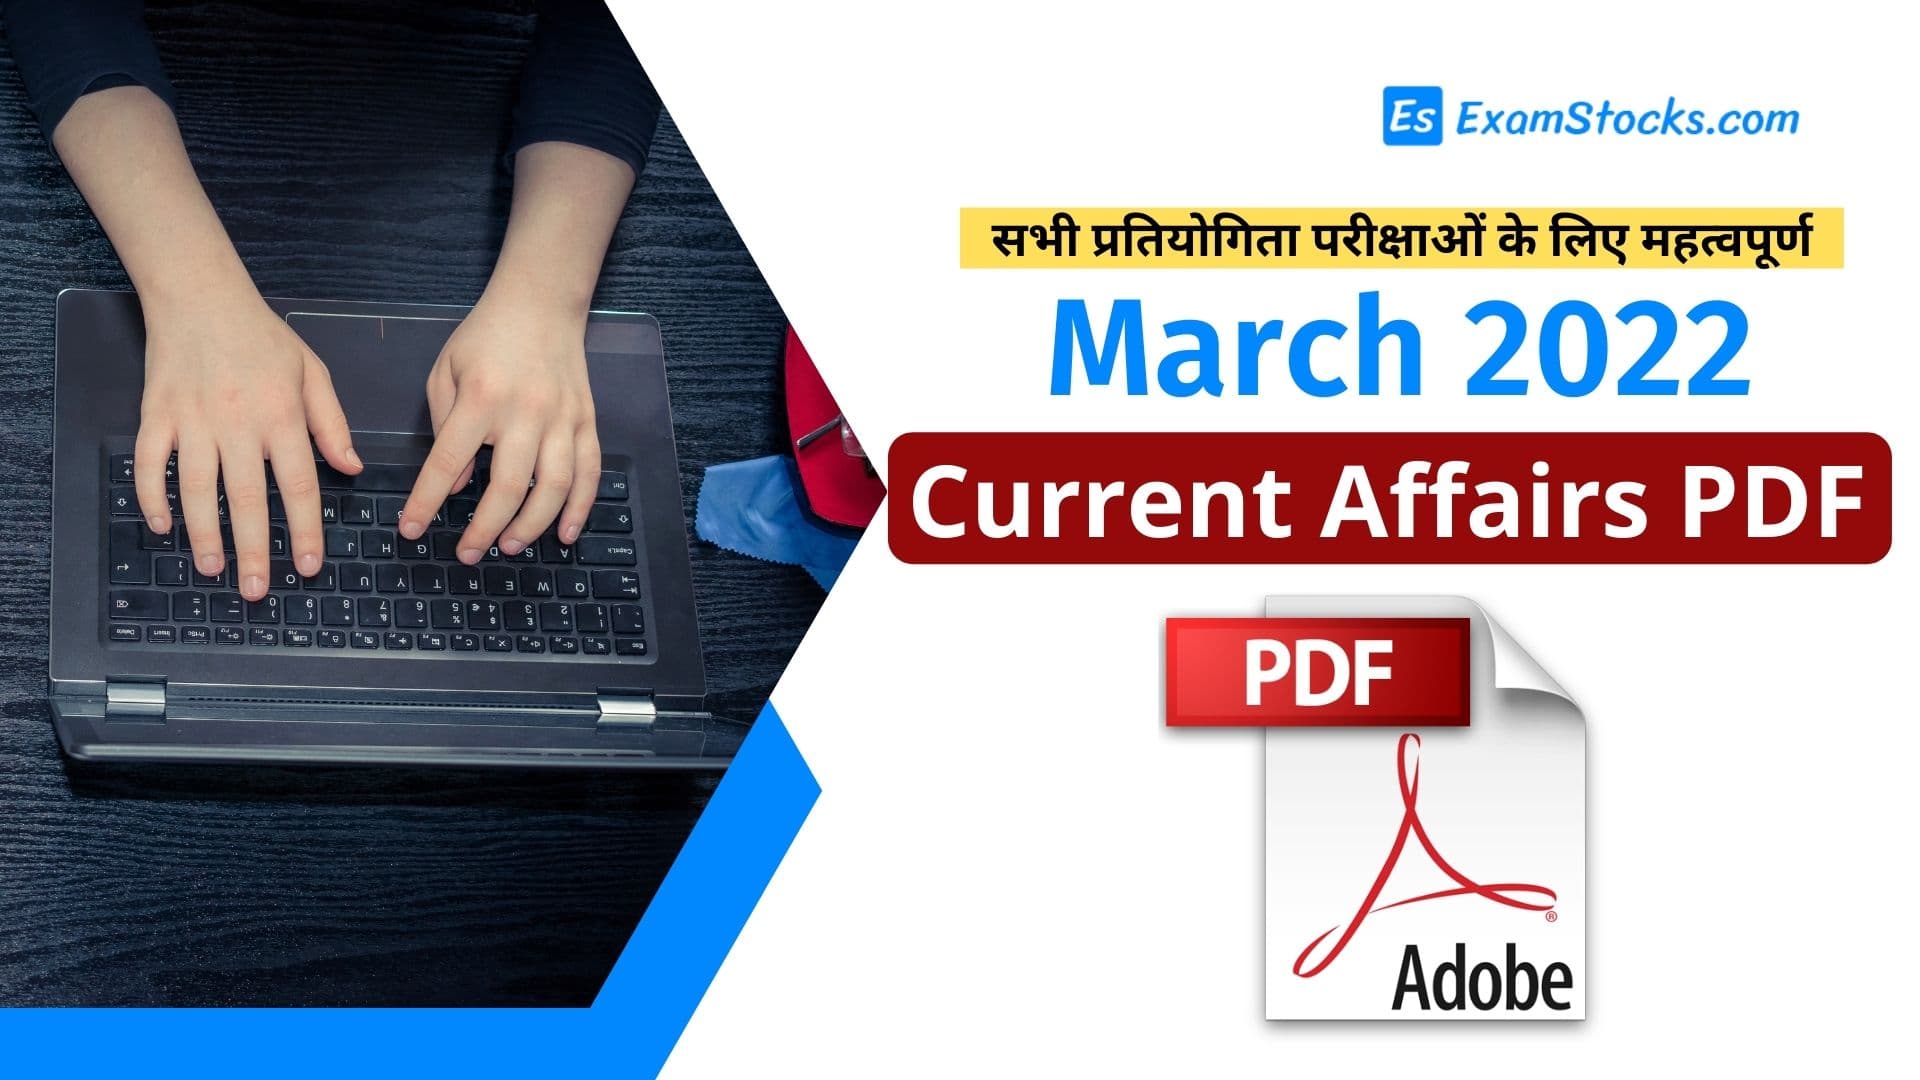 March 2022 Current Affairs PDF